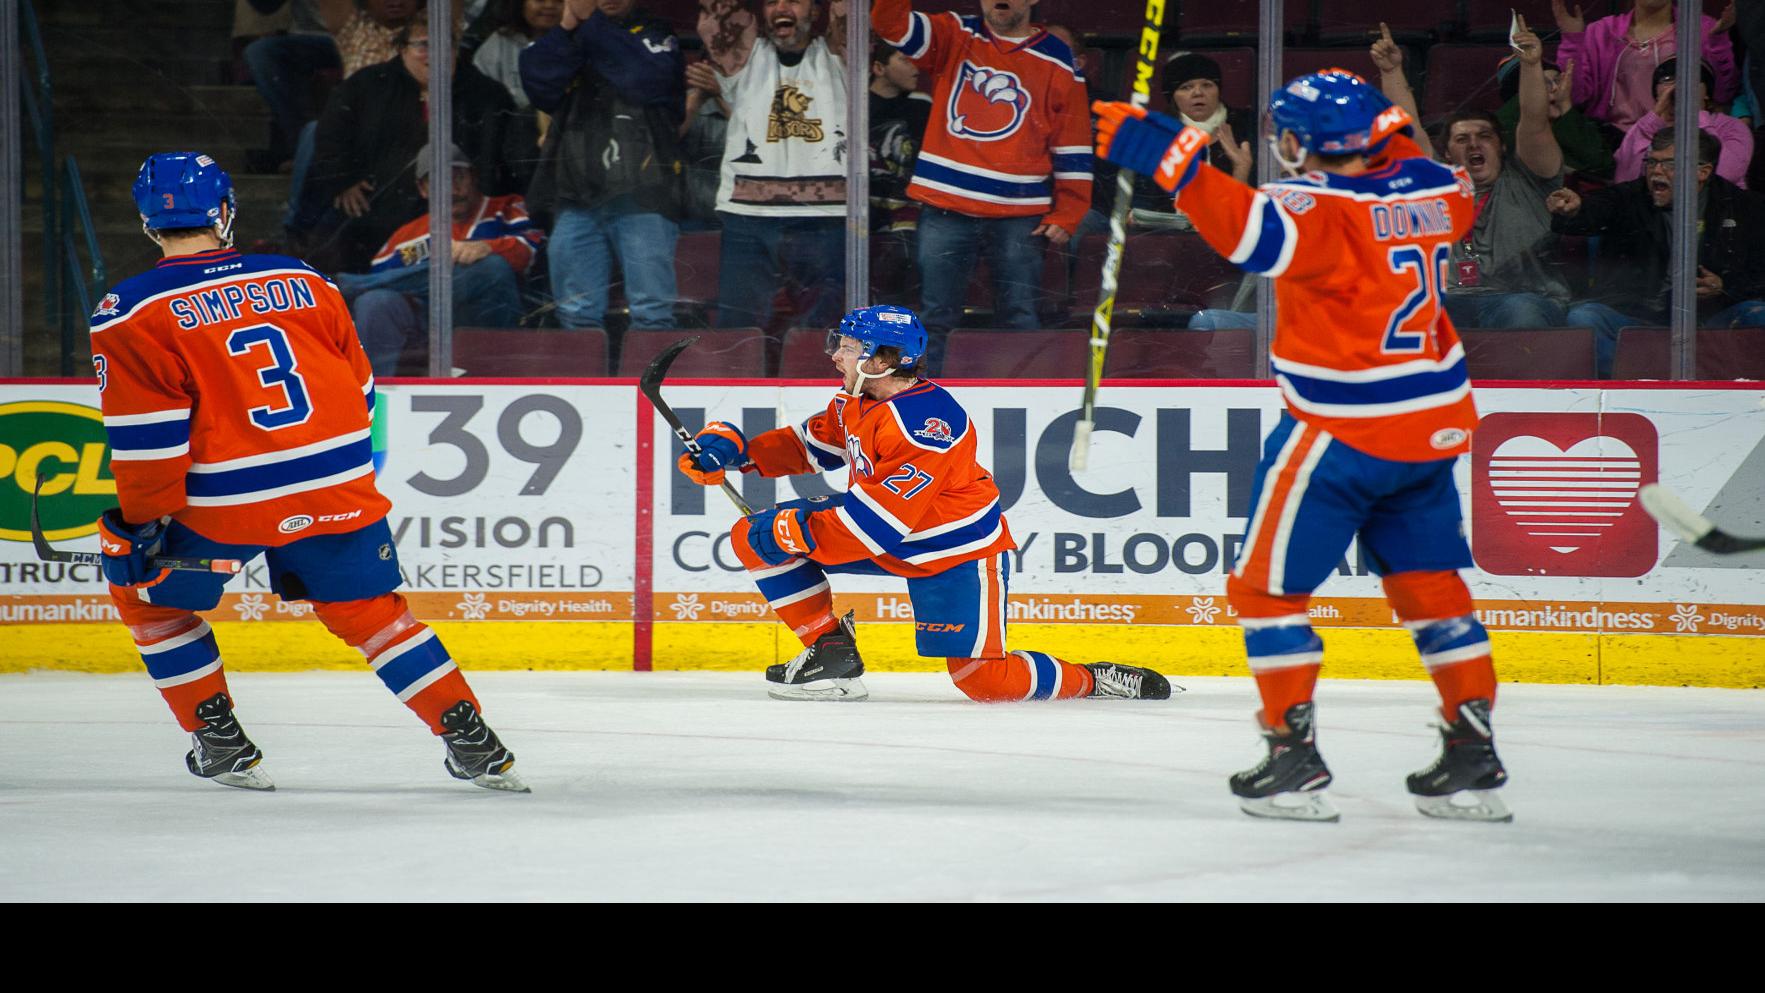 Currie's two goals not enough as Condors fall to Ontario, Sports